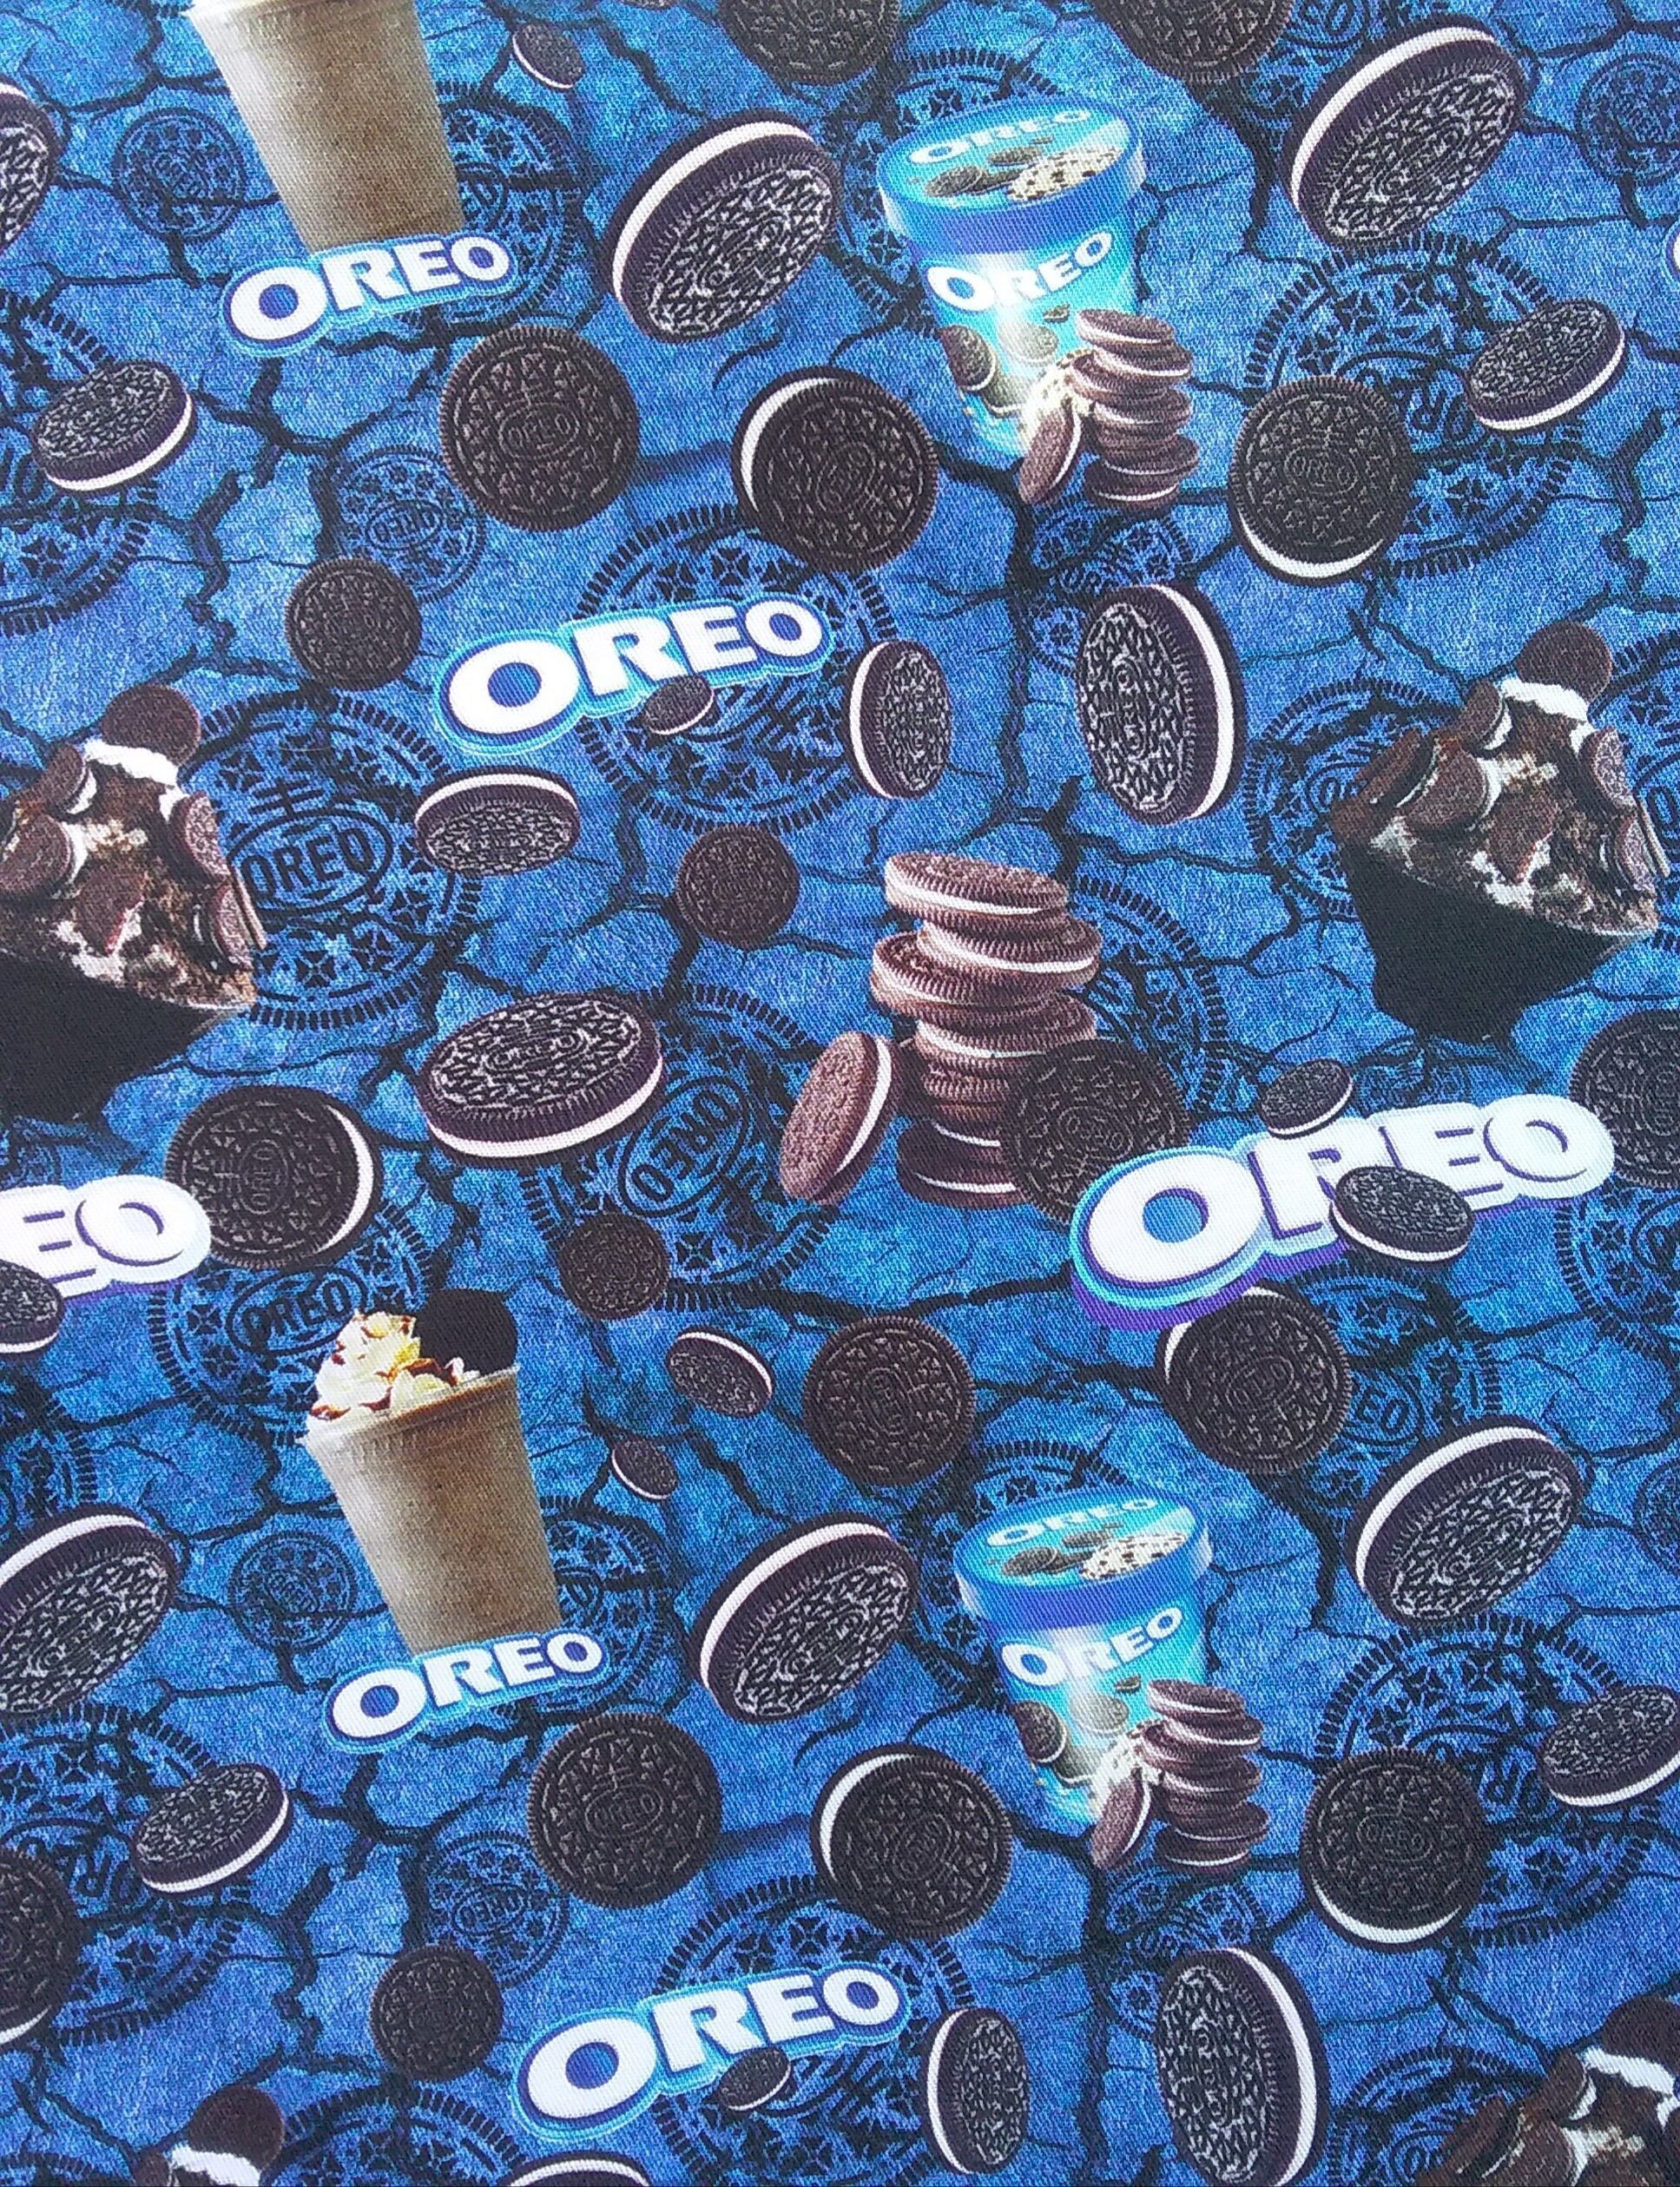 A close up of a blue Oreo patterned fabric - Oreo